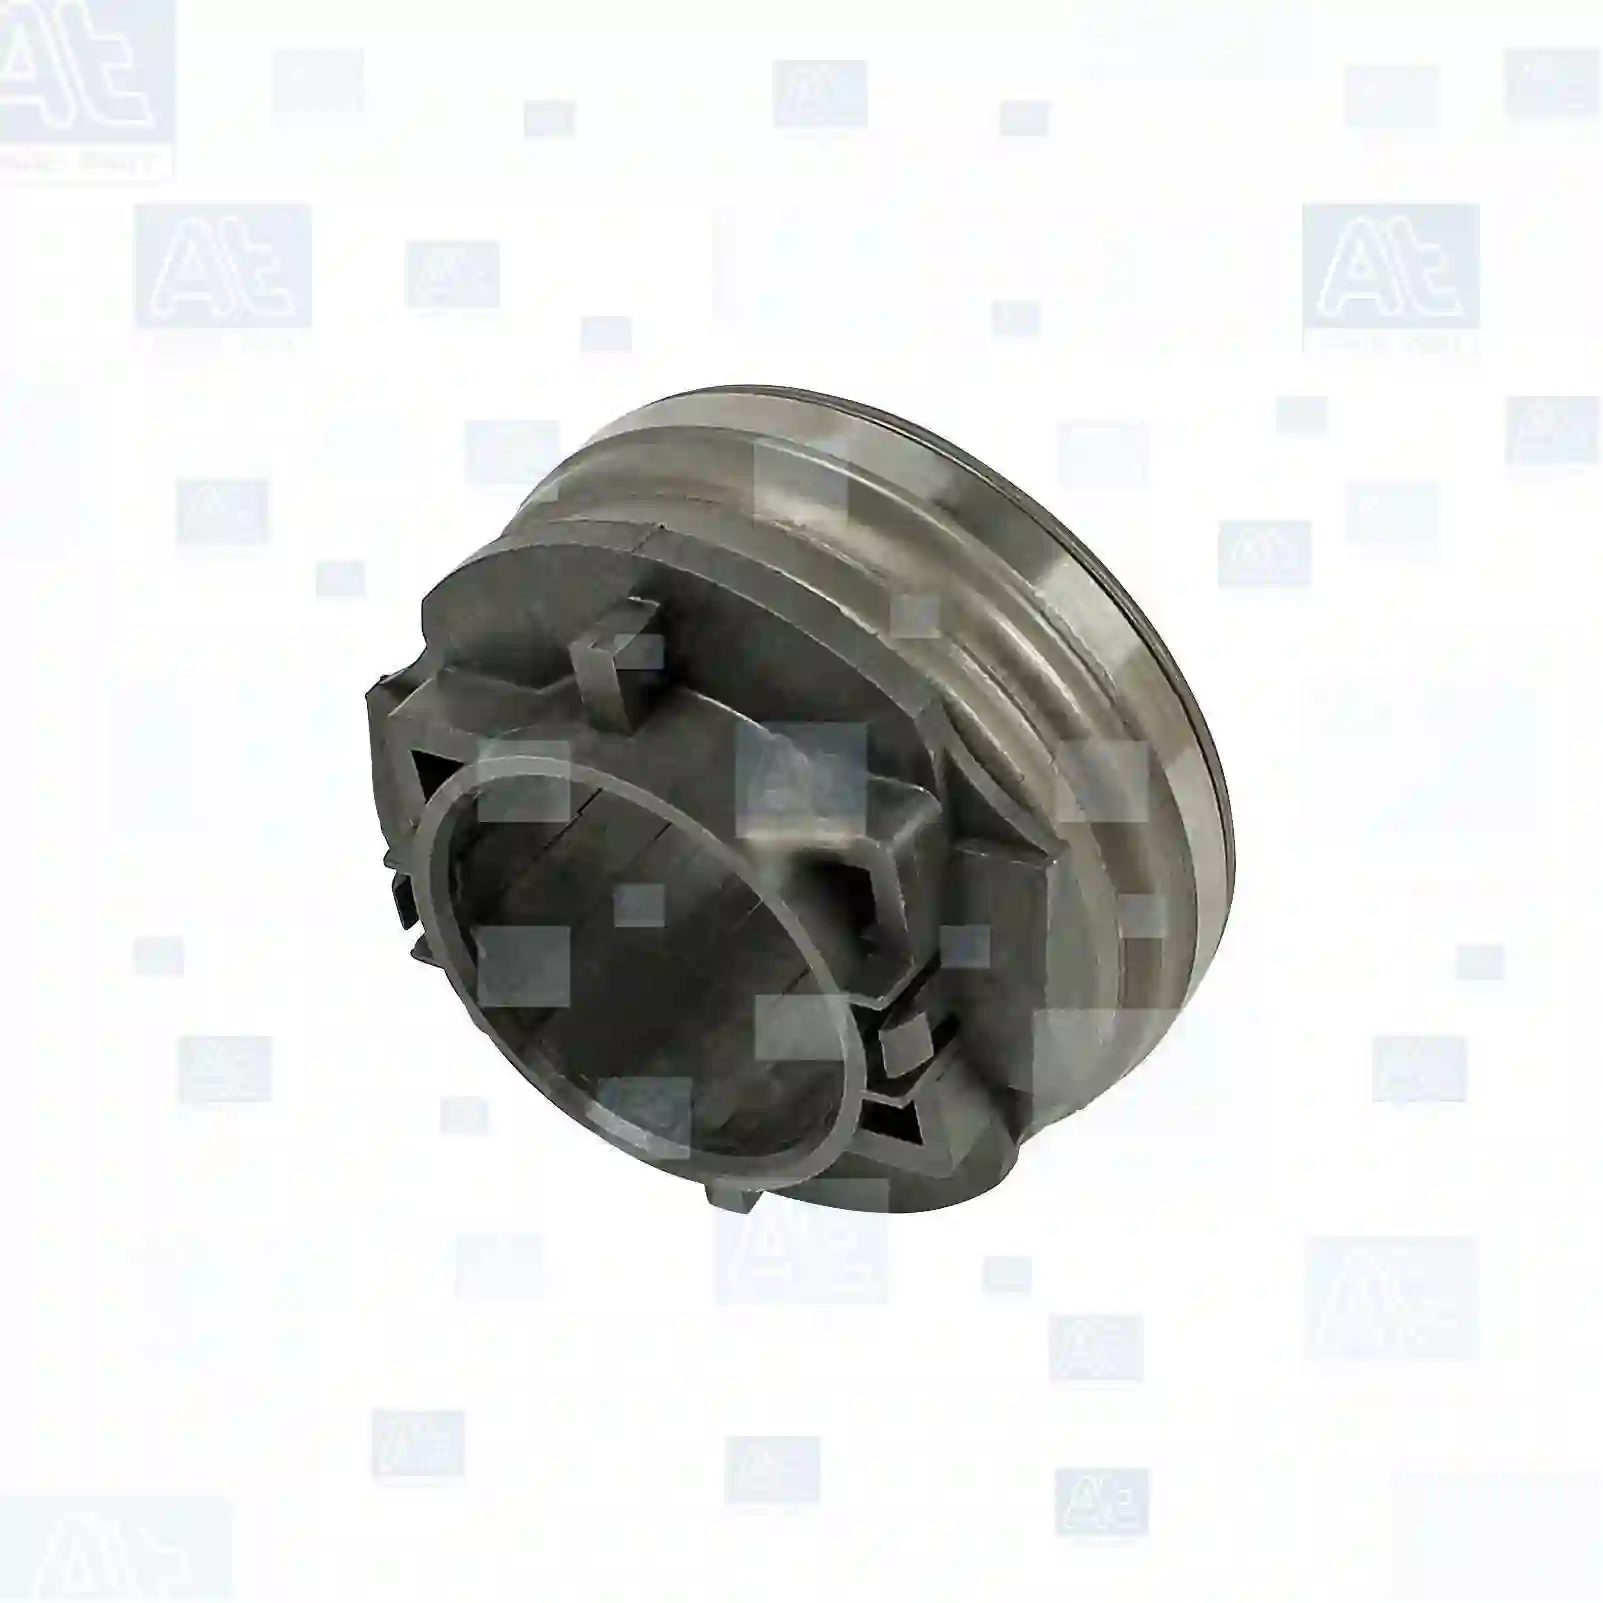 Release bearing, at no 77722091, oem no: 012141165A, 012141165E, 01E141165, 01E141165B, 3C11-7548-AA, 4142070, 4412070, 6164967, 88BB-7548-AA, 88BX-7548-A2A, U5A216510, 012141165E, 012141165A, 012141165B, 012141165C, 012141165D, 012141165E, 012141165F, 01E141165, 01E141165A, 01E141165B, 01E141165C, 01E141165D, 0B1141165, 0B1141165D, 0B1141165G At Spare Part | Engine, Accelerator Pedal, Camshaft, Connecting Rod, Crankcase, Crankshaft, Cylinder Head, Engine Suspension Mountings, Exhaust Manifold, Exhaust Gas Recirculation, Filter Kits, Flywheel Housing, General Overhaul Kits, Engine, Intake Manifold, Oil Cleaner, Oil Cooler, Oil Filter, Oil Pump, Oil Sump, Piston & Liner, Sensor & Switch, Timing Case, Turbocharger, Cooling System, Belt Tensioner, Coolant Filter, Coolant Pipe, Corrosion Prevention Agent, Drive, Expansion Tank, Fan, Intercooler, Monitors & Gauges, Radiator, Thermostat, V-Belt / Timing belt, Water Pump, Fuel System, Electronical Injector Unit, Feed Pump, Fuel Filter, cpl., Fuel Gauge Sender,  Fuel Line, Fuel Pump, Fuel Tank, Injection Line Kit, Injection Pump, Exhaust System, Clutch & Pedal, Gearbox, Propeller Shaft, Axles, Brake System, Hubs & Wheels, Suspension, Leaf Spring, Universal Parts / Accessories, Steering, Electrical System, Cabin Release bearing, at no 77722091, oem no: 012141165A, 012141165E, 01E141165, 01E141165B, 3C11-7548-AA, 4142070, 4412070, 6164967, 88BB-7548-AA, 88BX-7548-A2A, U5A216510, 012141165E, 012141165A, 012141165B, 012141165C, 012141165D, 012141165E, 012141165F, 01E141165, 01E141165A, 01E141165B, 01E141165C, 01E141165D, 0B1141165, 0B1141165D, 0B1141165G At Spare Part | Engine, Accelerator Pedal, Camshaft, Connecting Rod, Crankcase, Crankshaft, Cylinder Head, Engine Suspension Mountings, Exhaust Manifold, Exhaust Gas Recirculation, Filter Kits, Flywheel Housing, General Overhaul Kits, Engine, Intake Manifold, Oil Cleaner, Oil Cooler, Oil Filter, Oil Pump, Oil Sump, Piston & Liner, Sensor & Switch, Timing Case, Turbocharger, Cooling System, Belt Tensioner, Coolant Filter, Coolant Pipe, Corrosion Prevention Agent, Drive, Expansion Tank, Fan, Intercooler, Monitors & Gauges, Radiator, Thermostat, V-Belt / Timing belt, Water Pump, Fuel System, Electronical Injector Unit, Feed Pump, Fuel Filter, cpl., Fuel Gauge Sender,  Fuel Line, Fuel Pump, Fuel Tank, Injection Line Kit, Injection Pump, Exhaust System, Clutch & Pedal, Gearbox, Propeller Shaft, Axles, Brake System, Hubs & Wheels, Suspension, Leaf Spring, Universal Parts / Accessories, Steering, Electrical System, Cabin